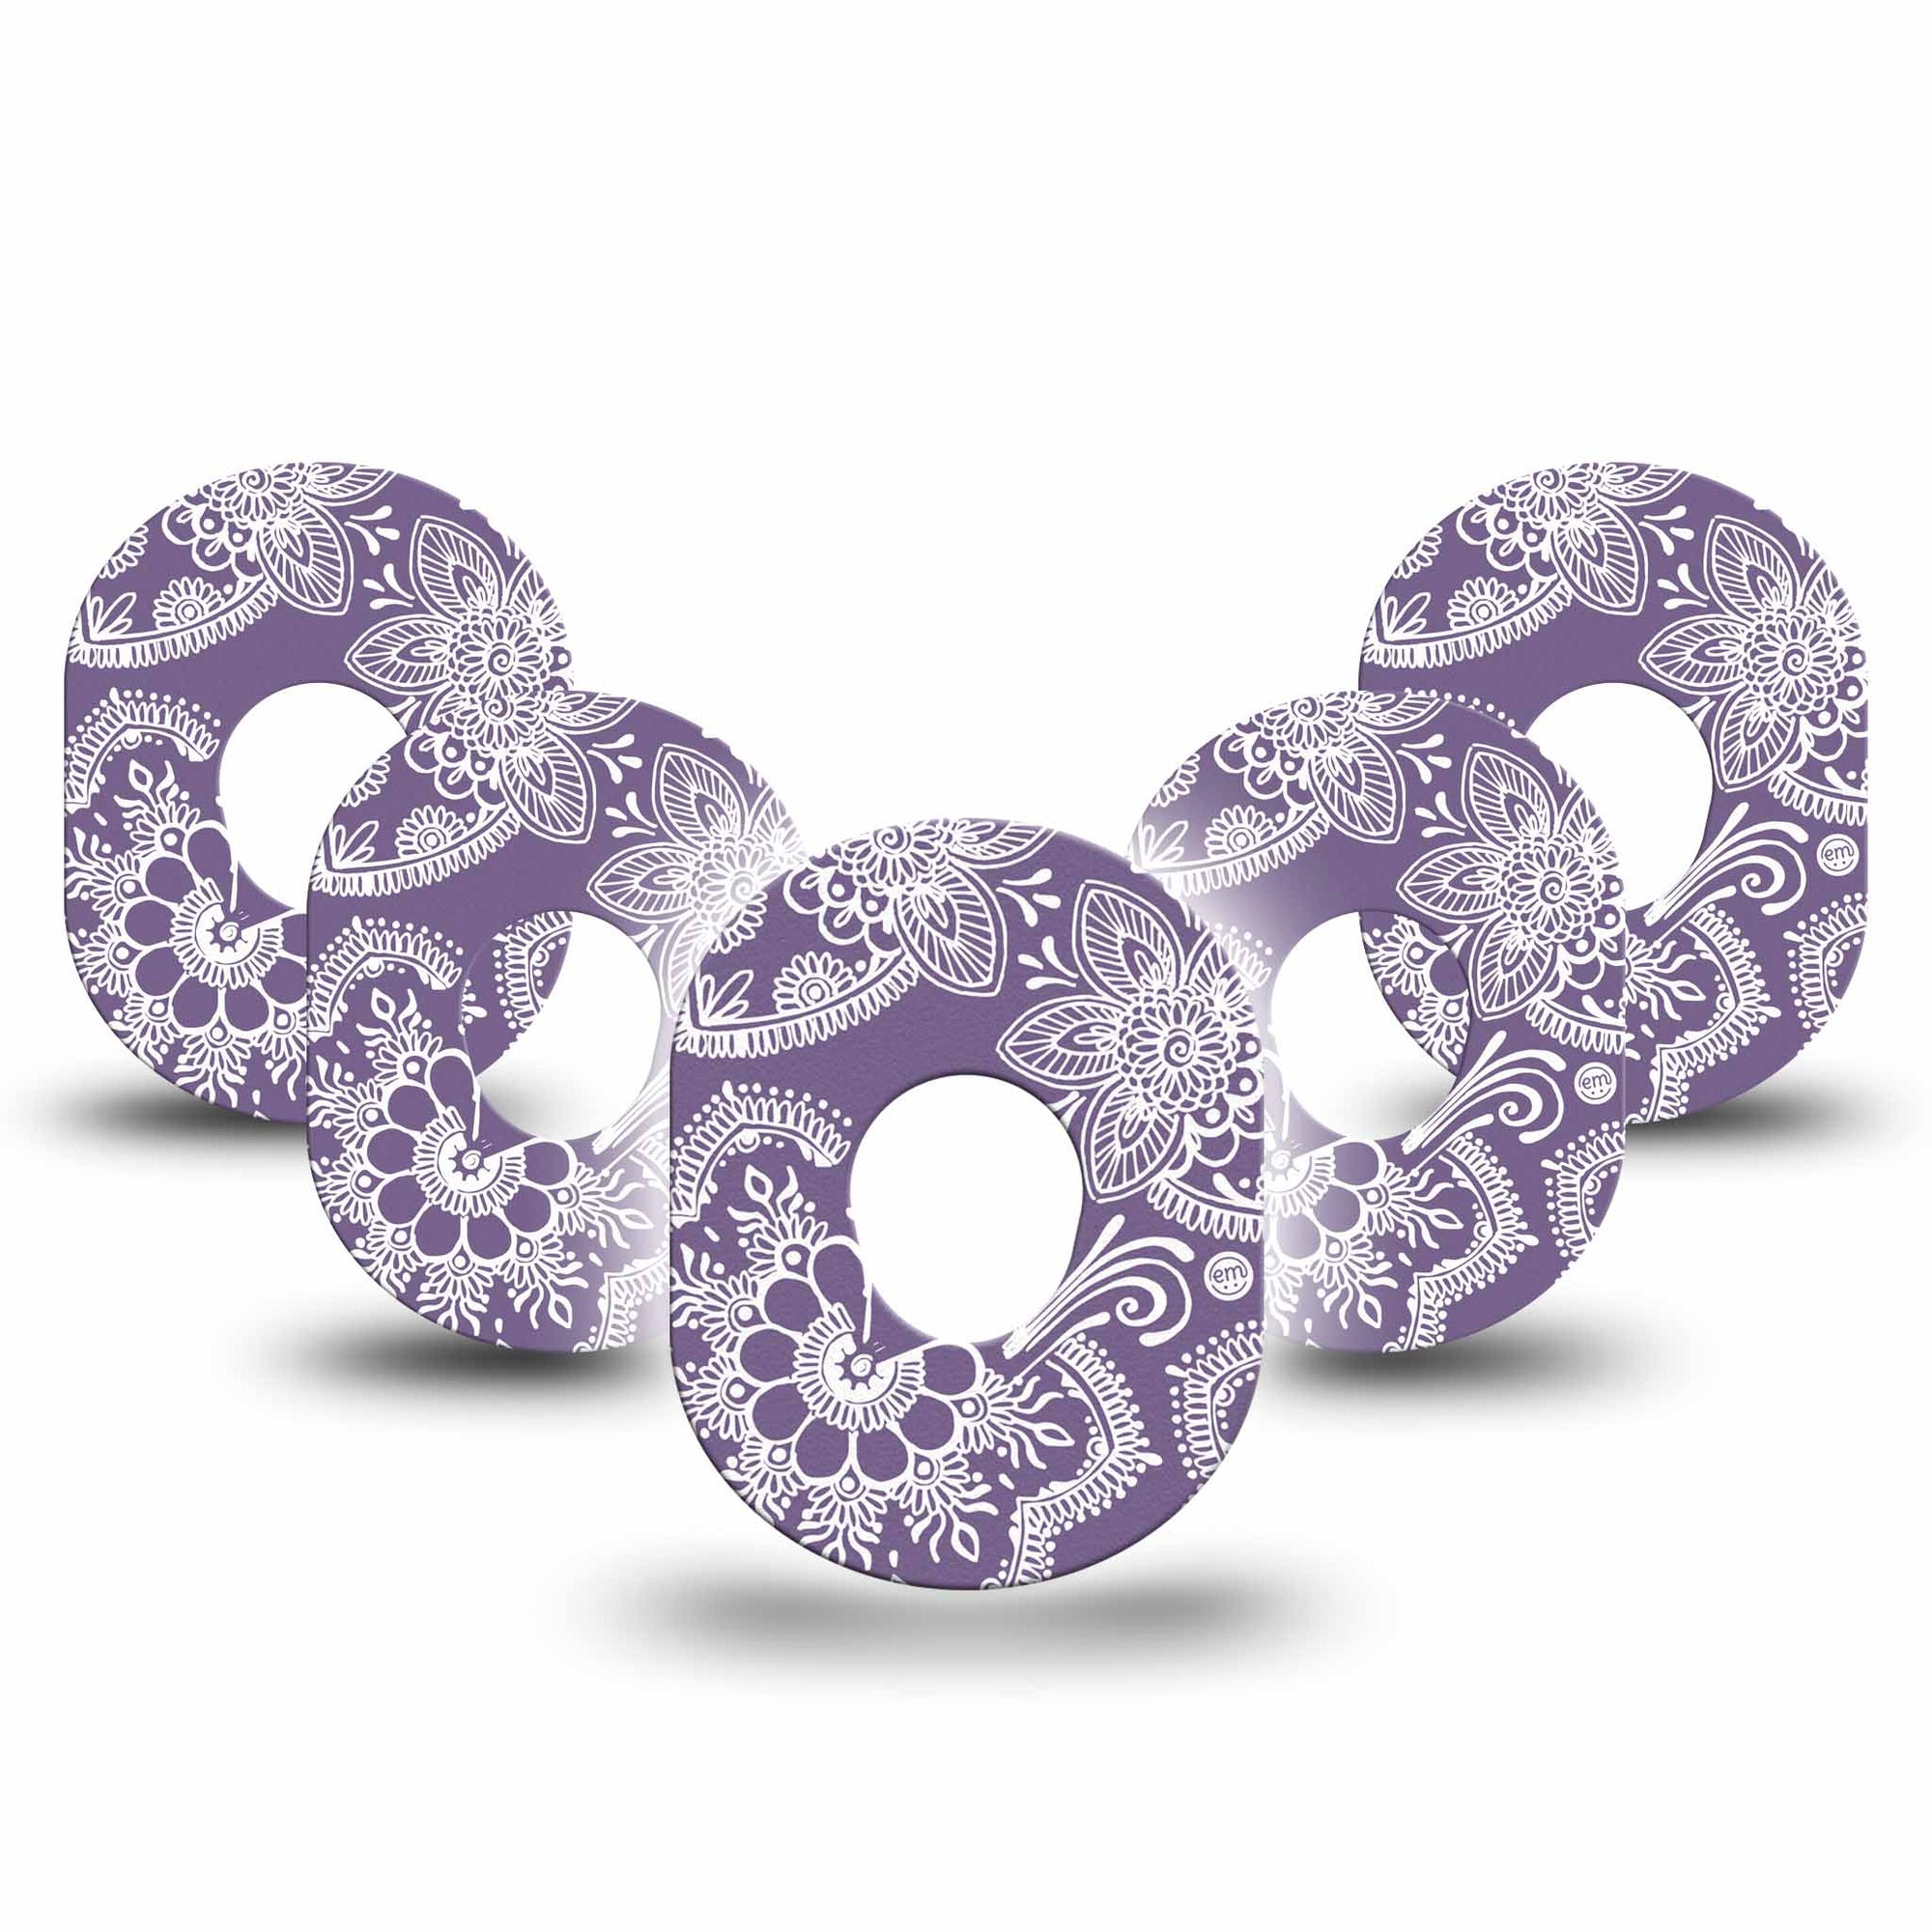 ExpressionMed Purple Henna Dexcom G7 Patch, 5-Pack, Purple Henna Floral Inspired CGM Adhesive Tape Design